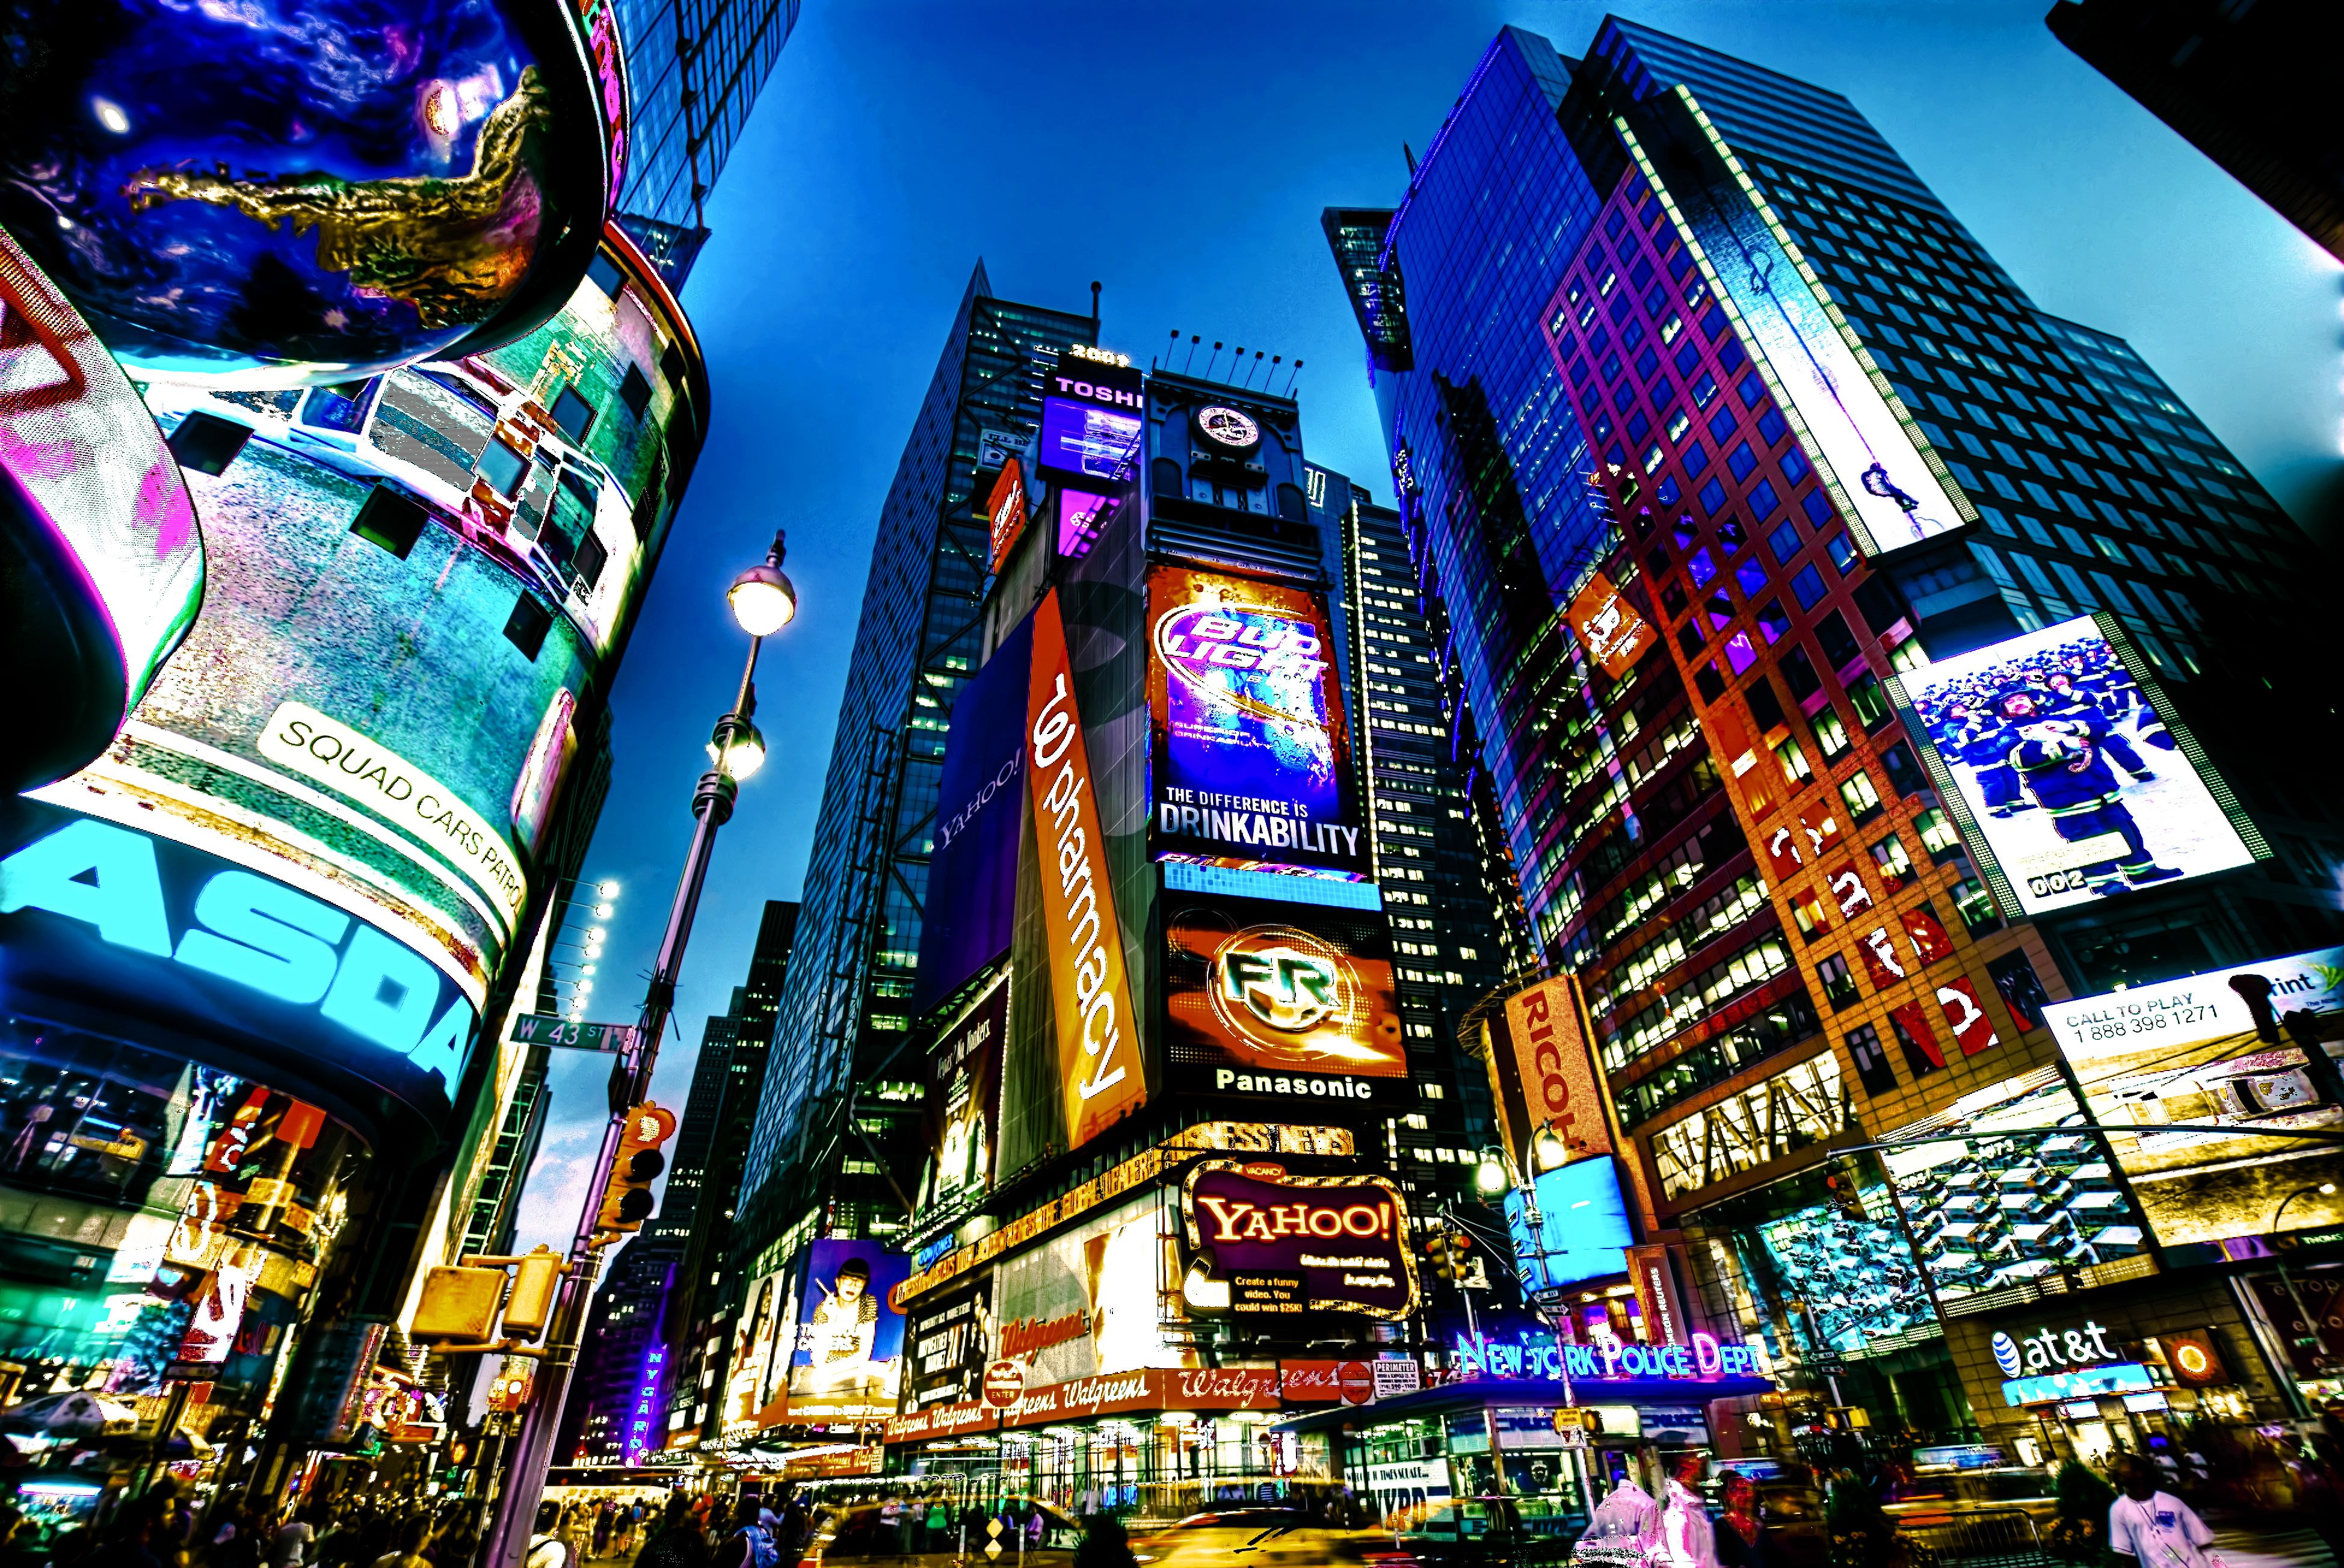 Times Square Wallpaper iPhone - wallpaper